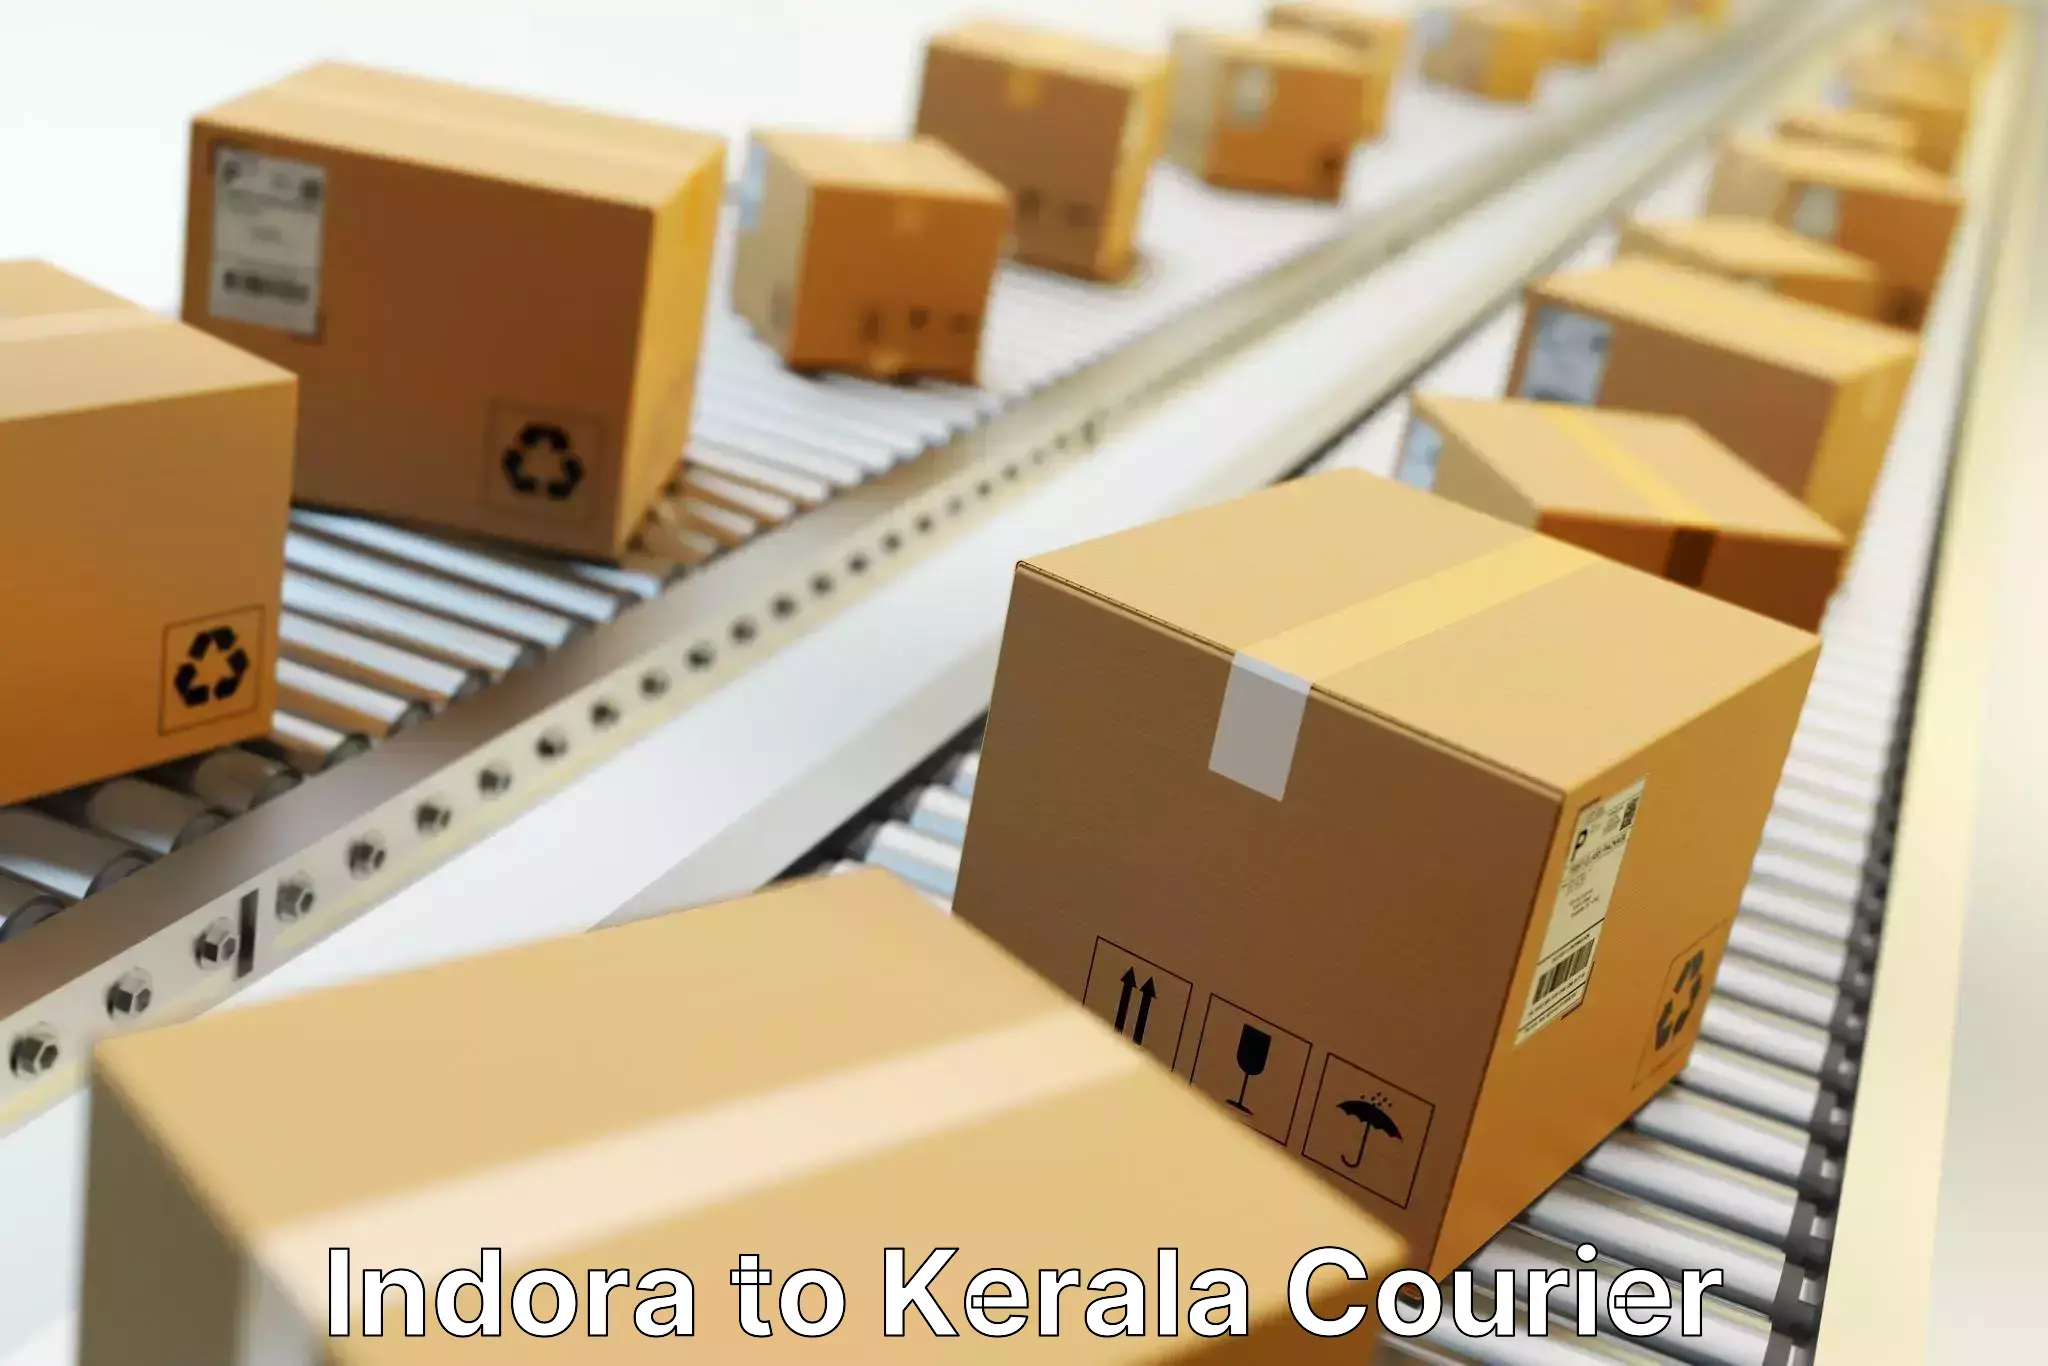 State-of-the-art courier technology Indora to Cochin University of Science and Technology